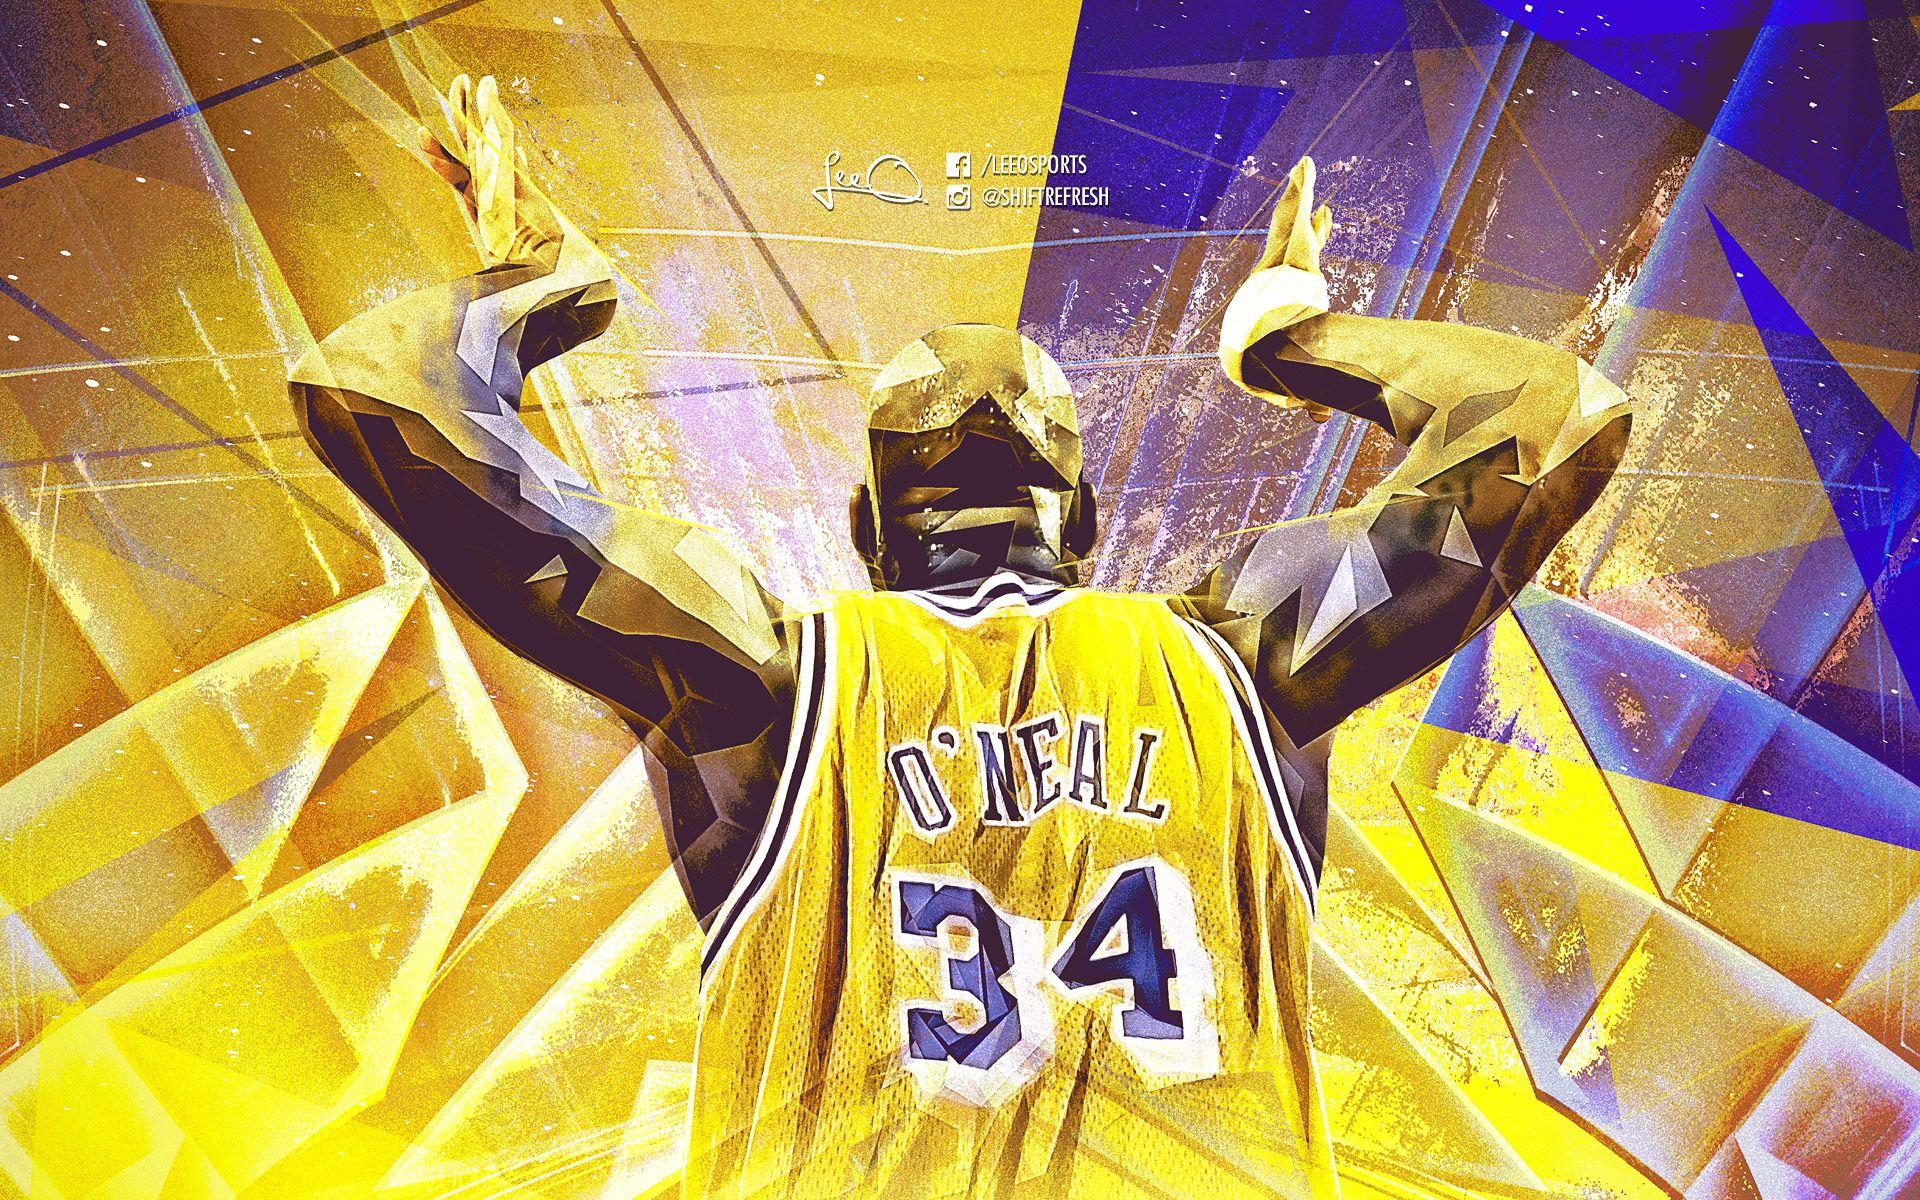 Shaquille o'neal wallpaper hd (7) - Photo #1381 - PNG Wala - Photo And PNG  100% Free Stock Images